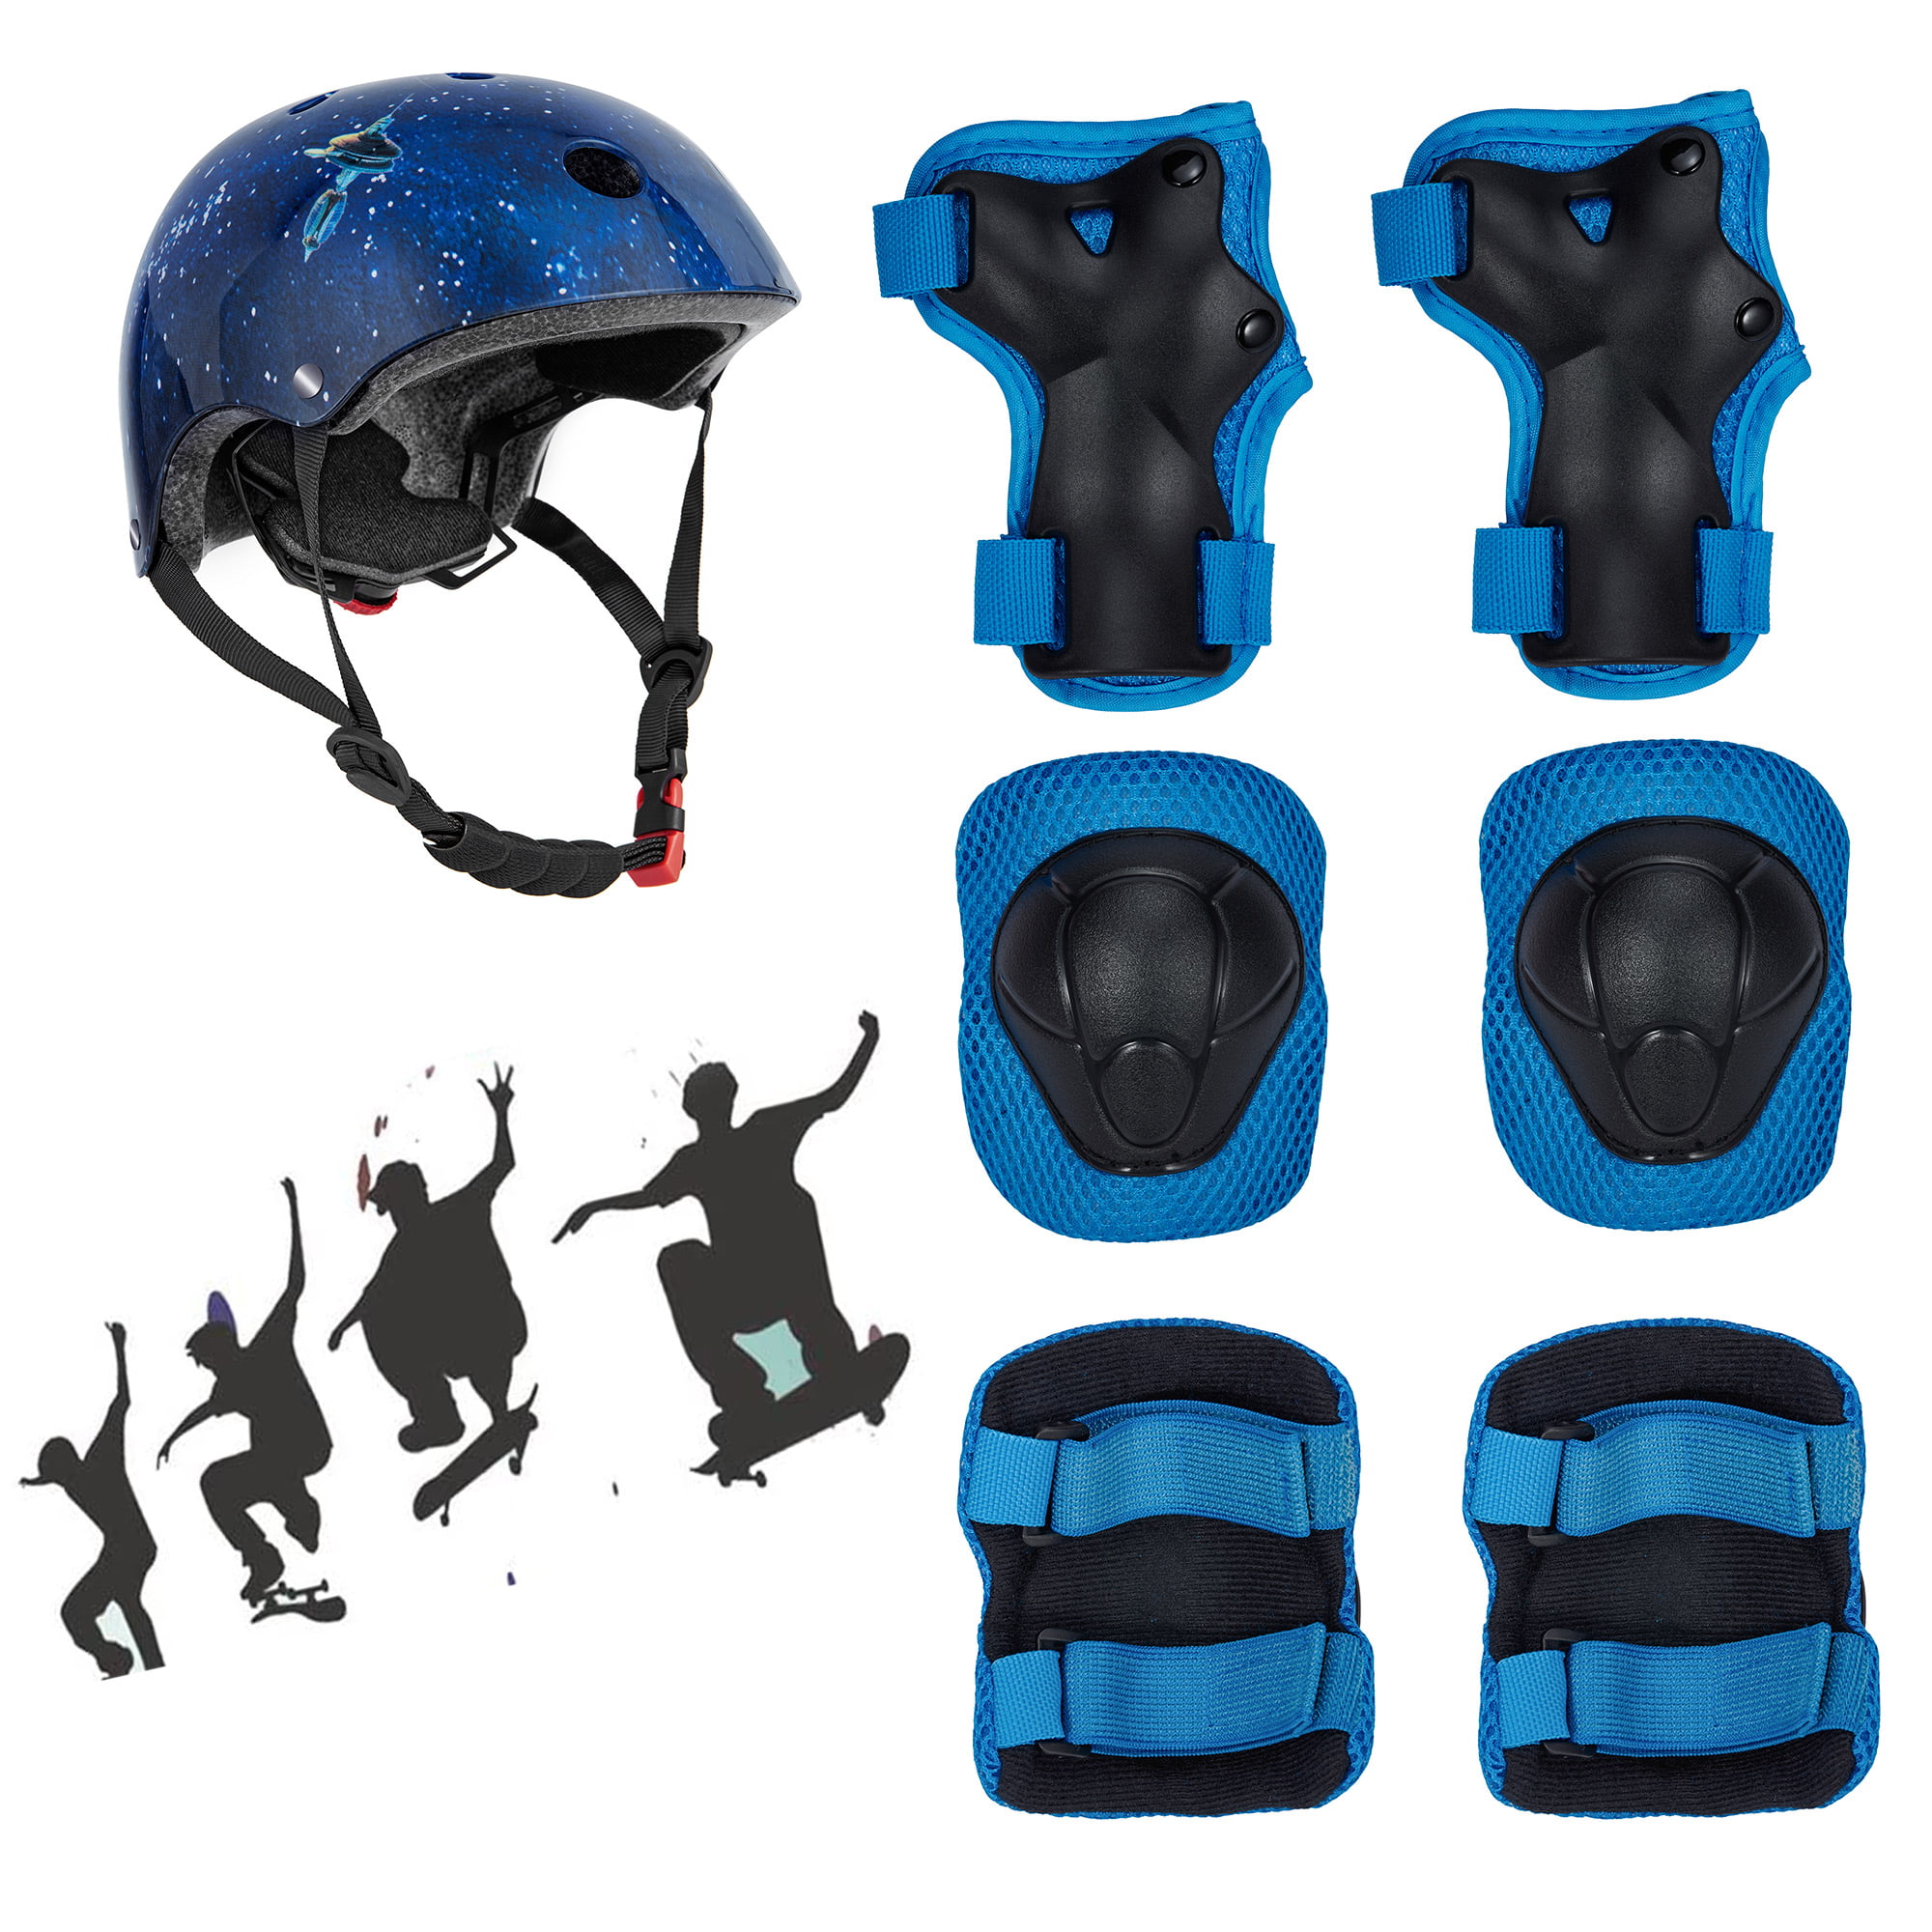 Details about   7Pcs Protective Gear Helmet Knee Pads Adult Kids Cycling Skating Skateboard S-L 